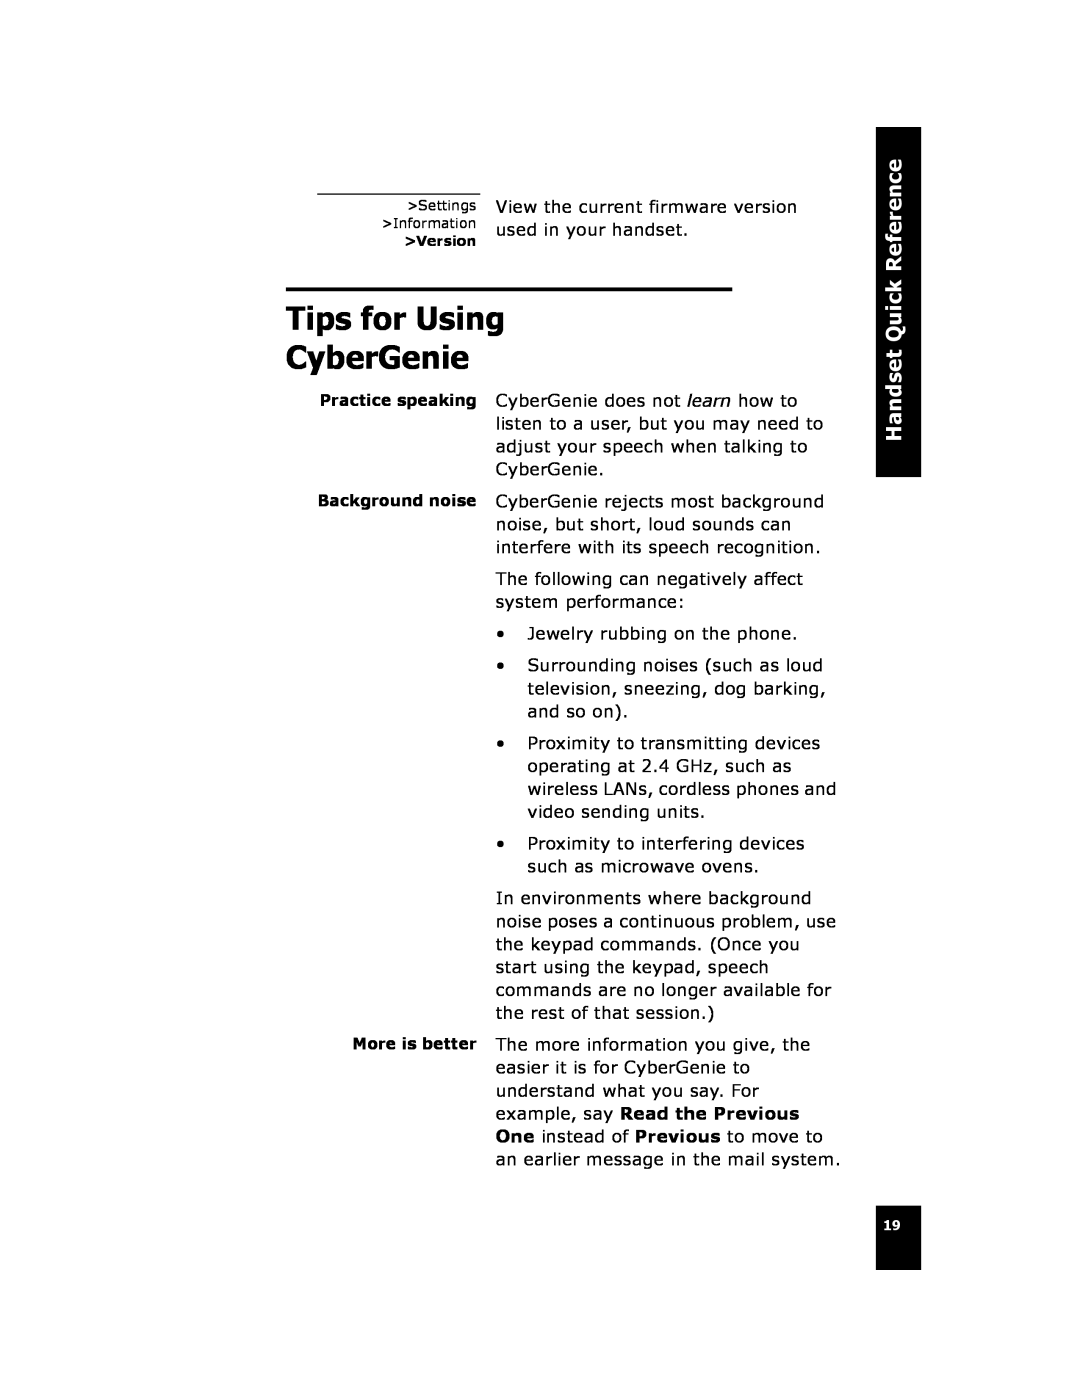 Cygnion CG 2400 manual Tips for Using CyberGenie, Handset Quick Reference 